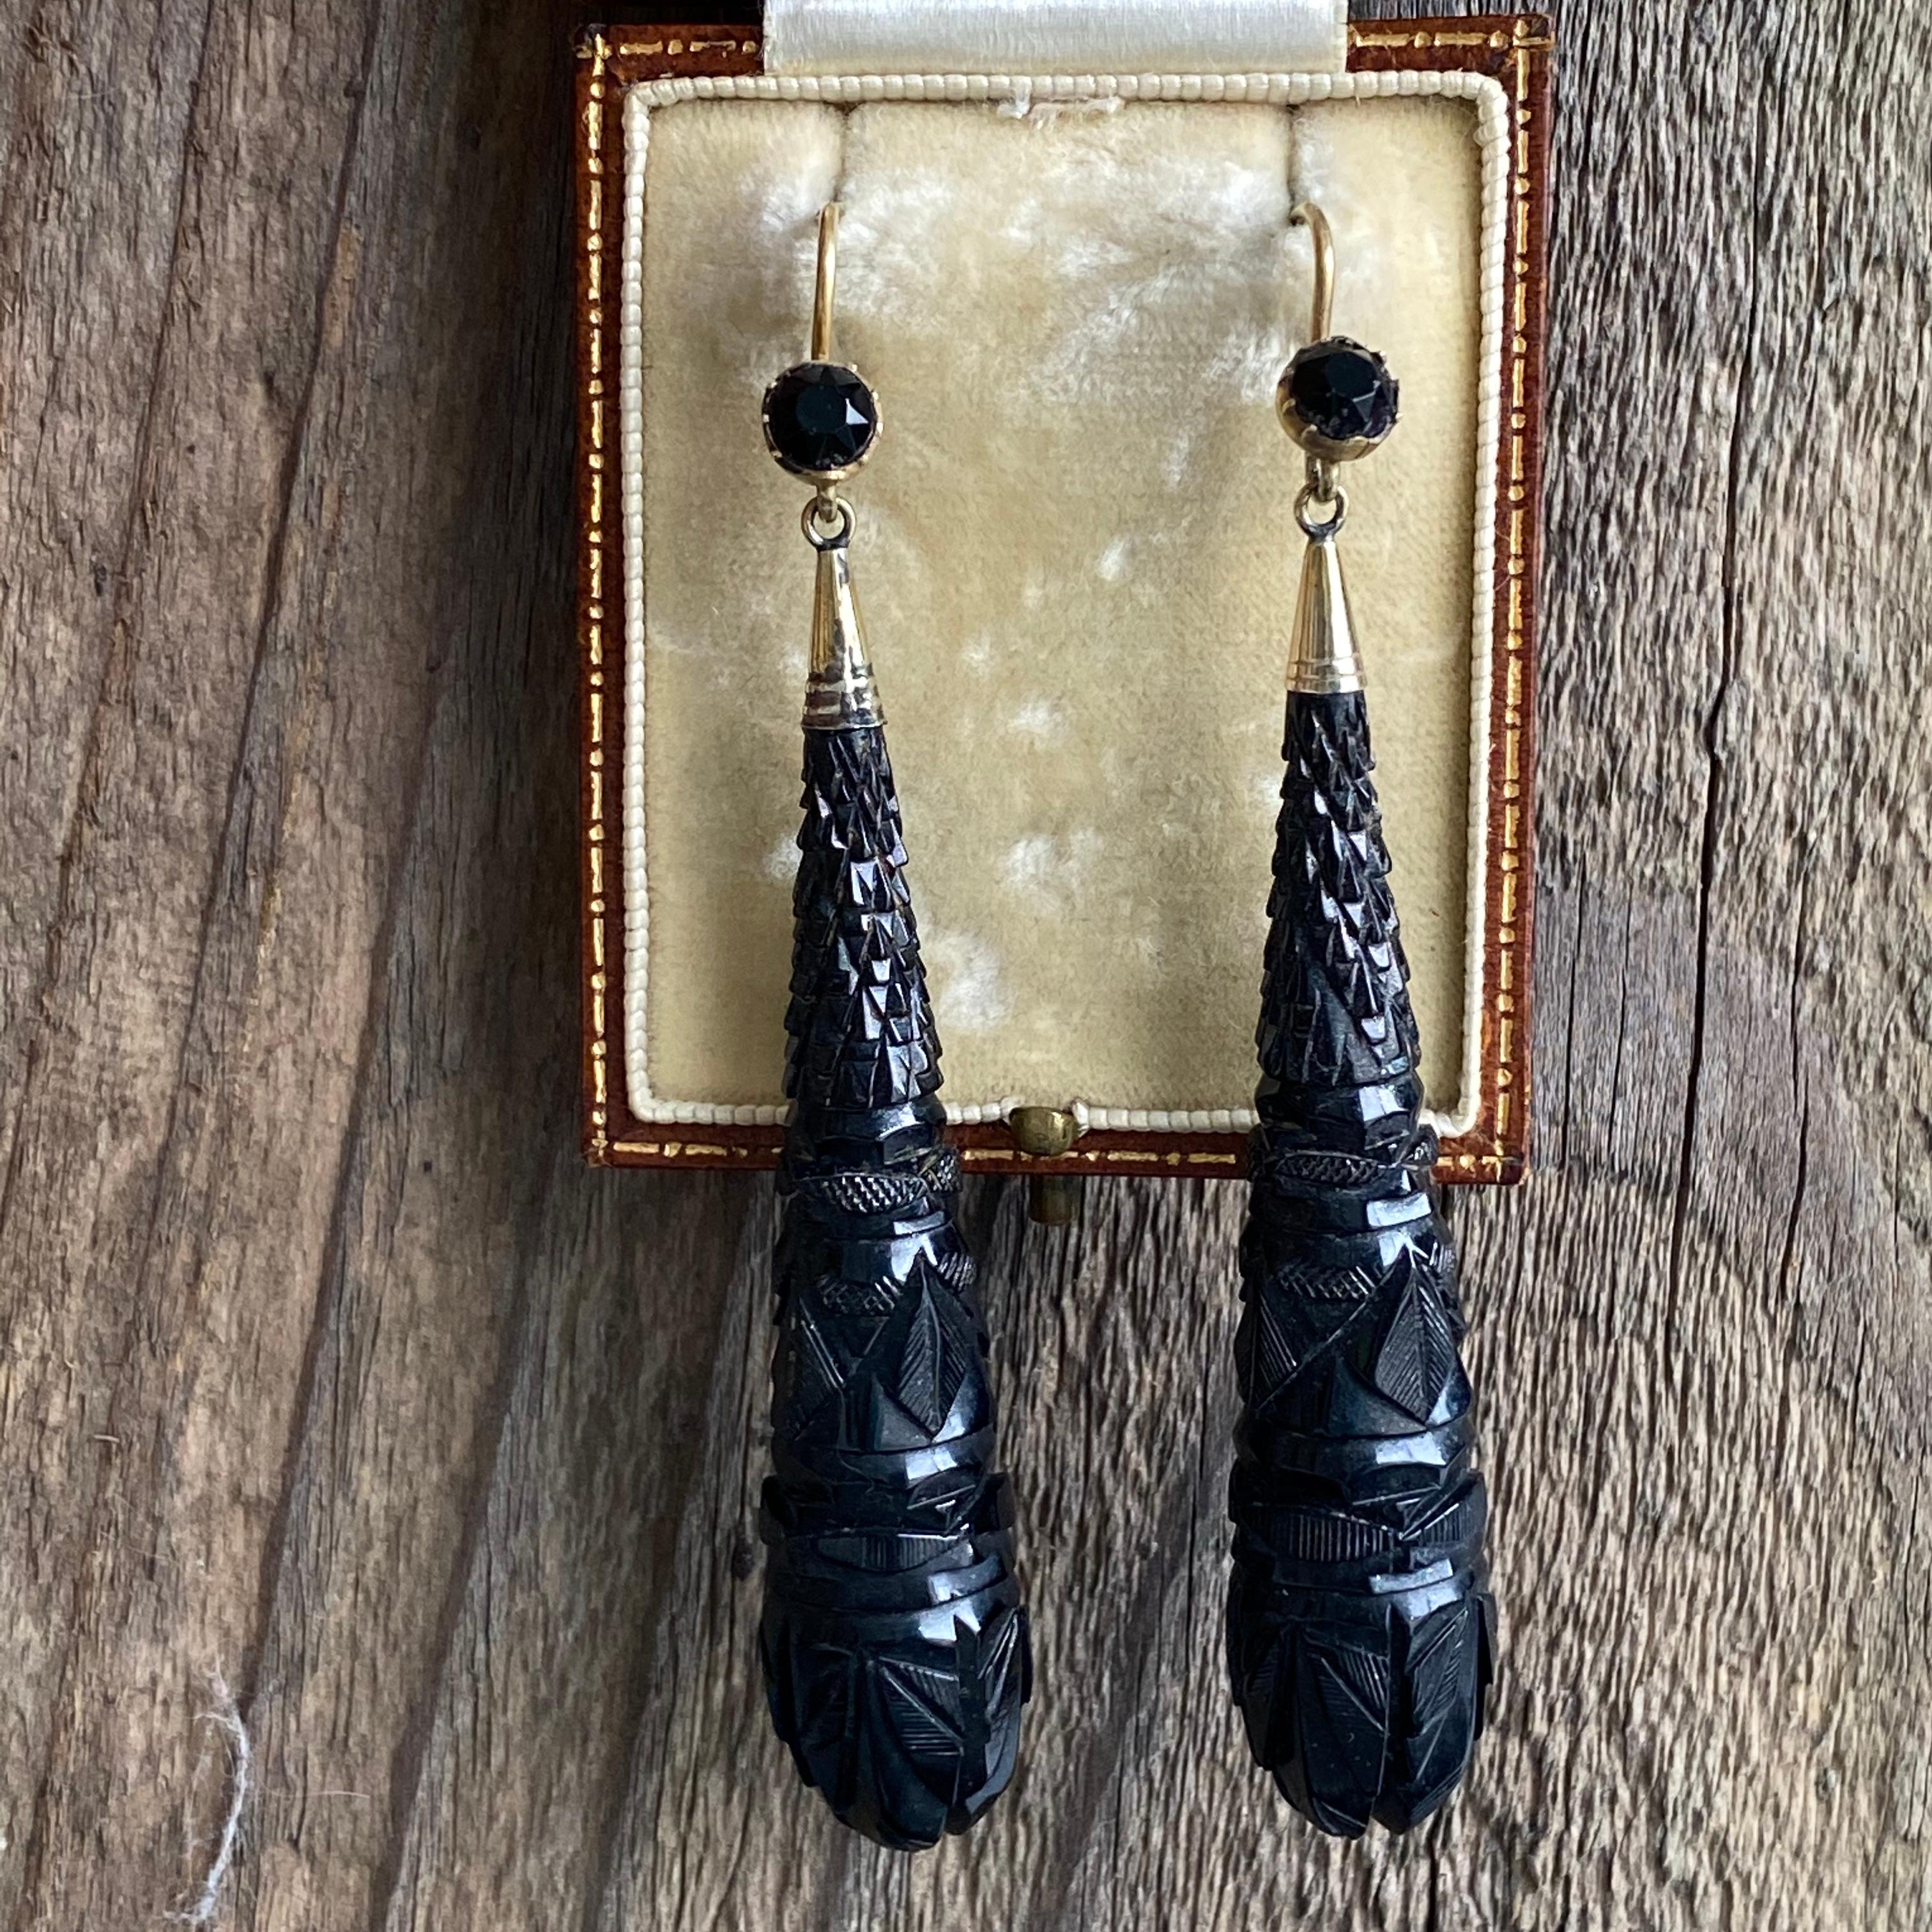 Details:
Lovely pair of Victorian jet aarrings with 14K gold ear wires with a faceted jet stone on the wire. They are beautifully carved, and in amazing condition. They are very lovely and feminine. Despite their dramatic length, they are